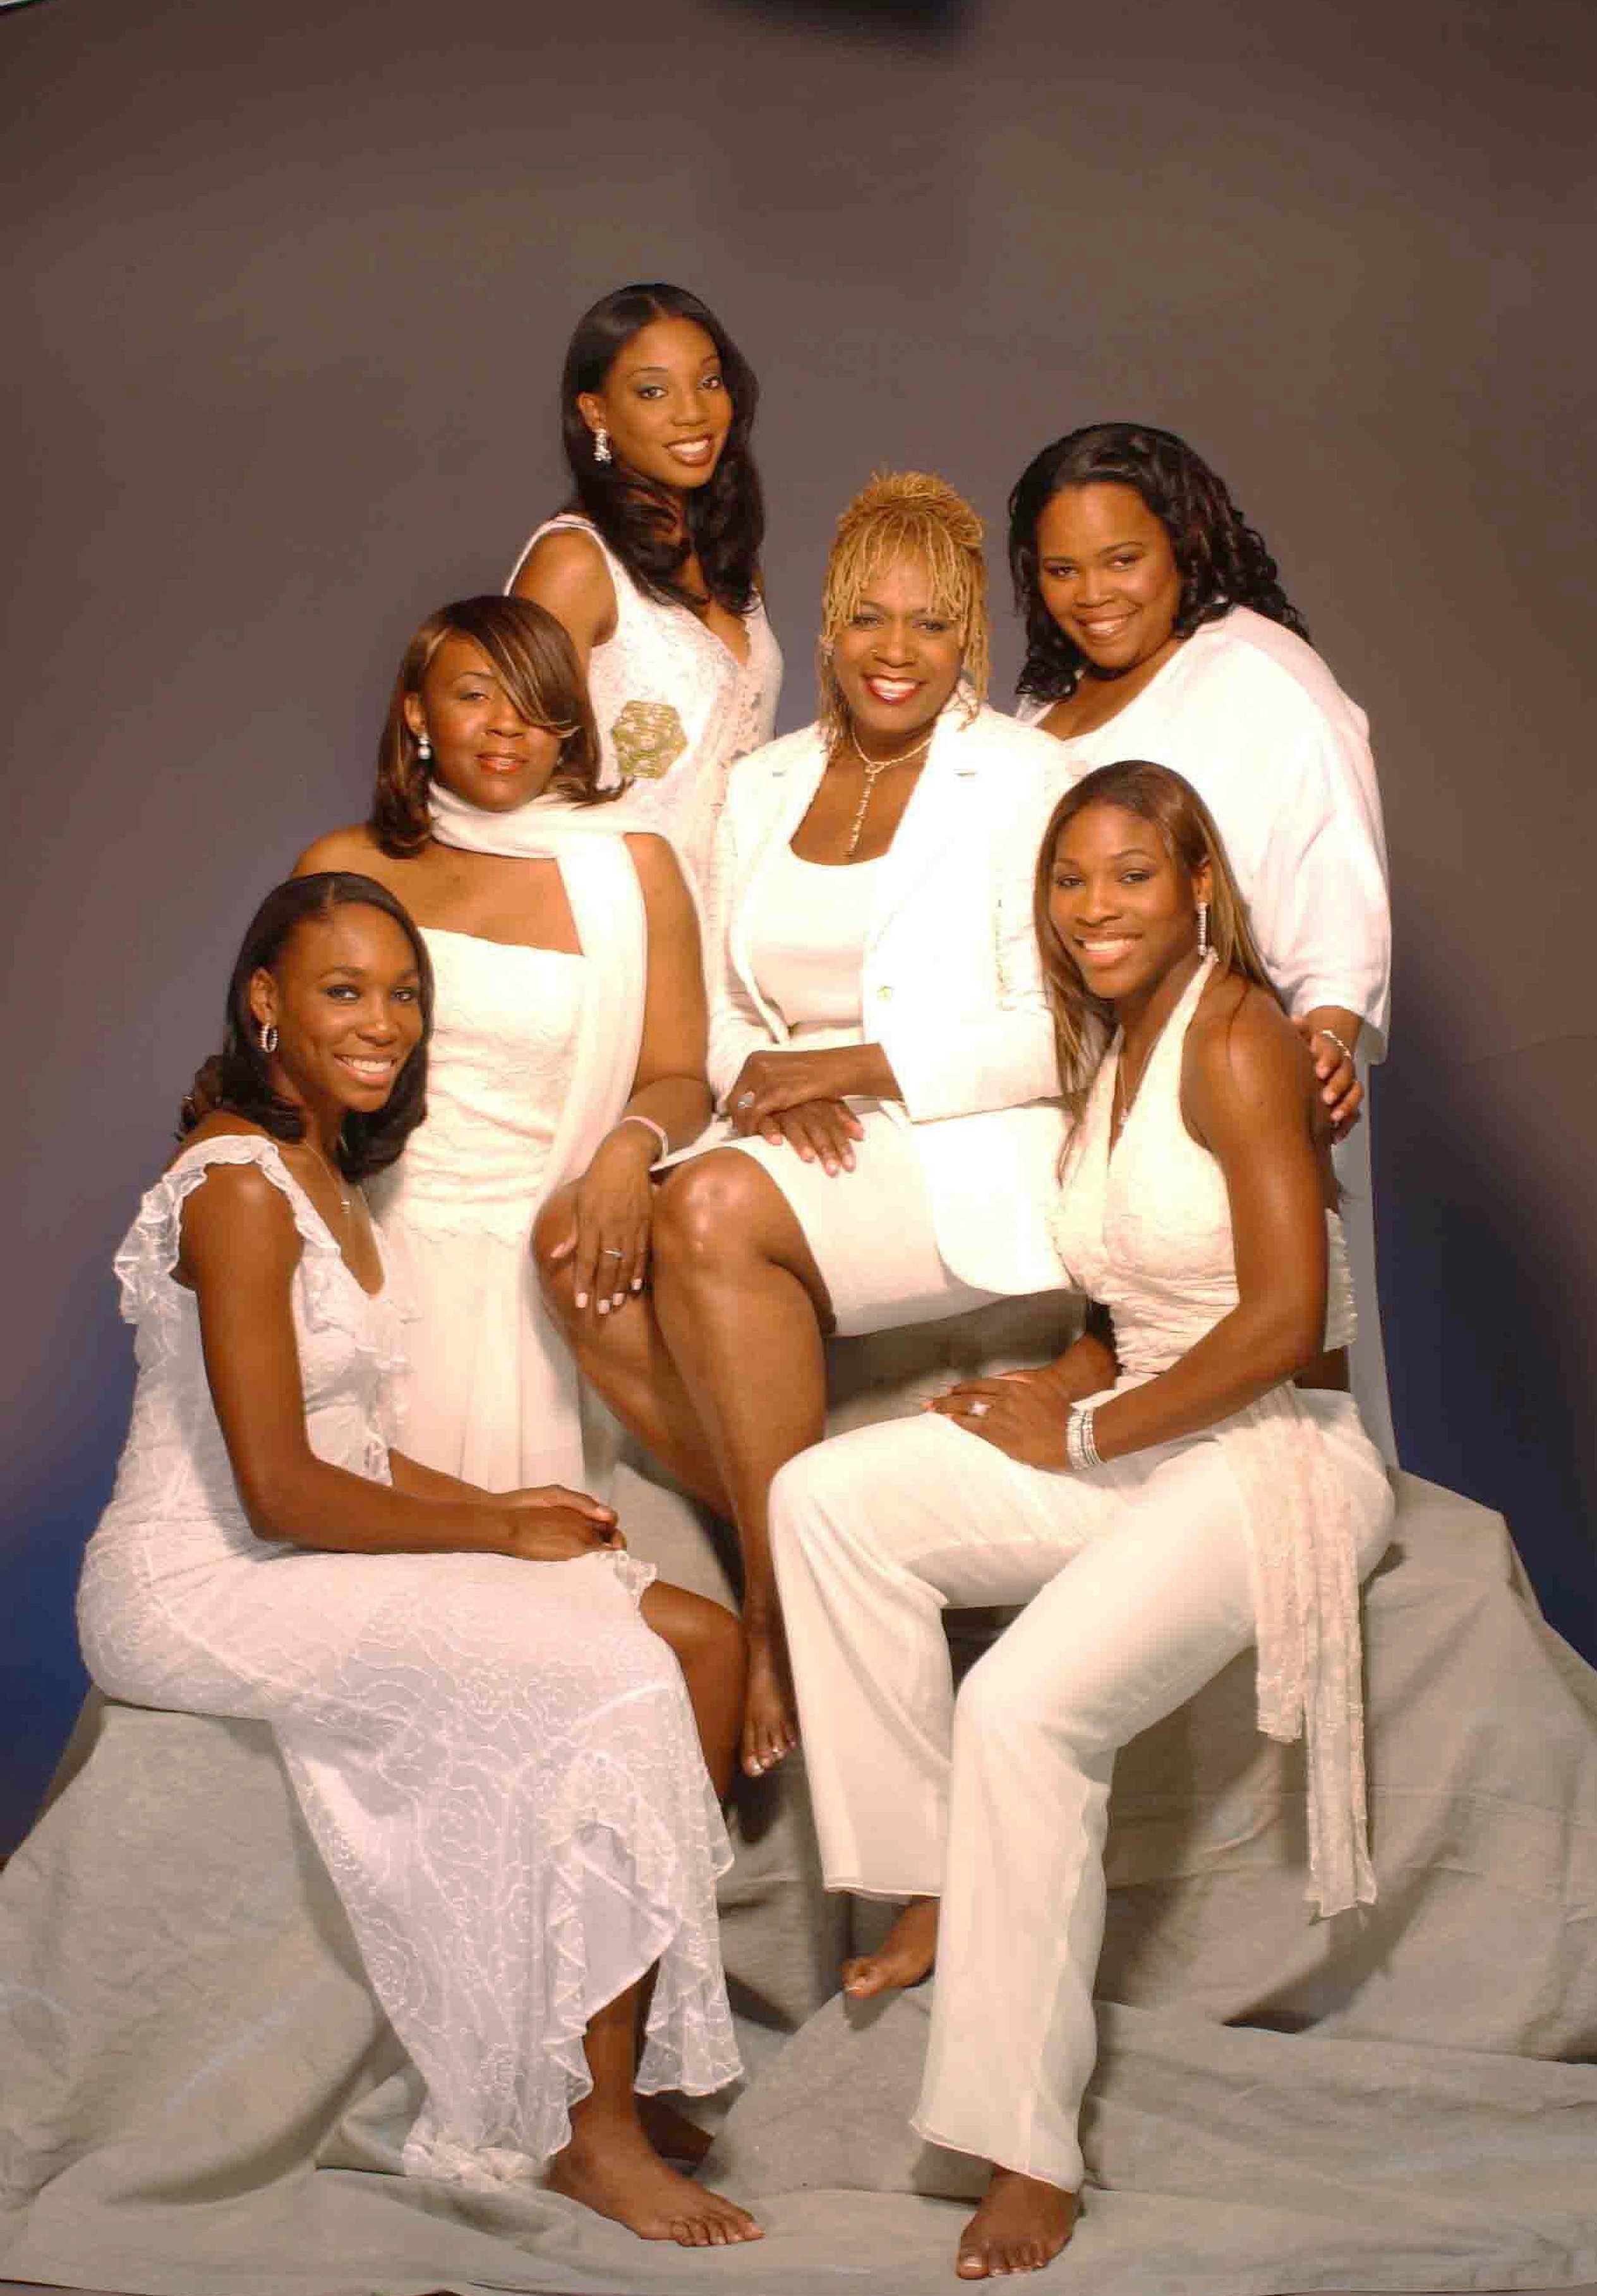 The Price/Williams family: Lyndrea Price, Oracene Price, Isha Price, Serena Williams, Venus Williams and Yetunde Price pose for a portrait in Los Angeles, California. | Source: Getty Images